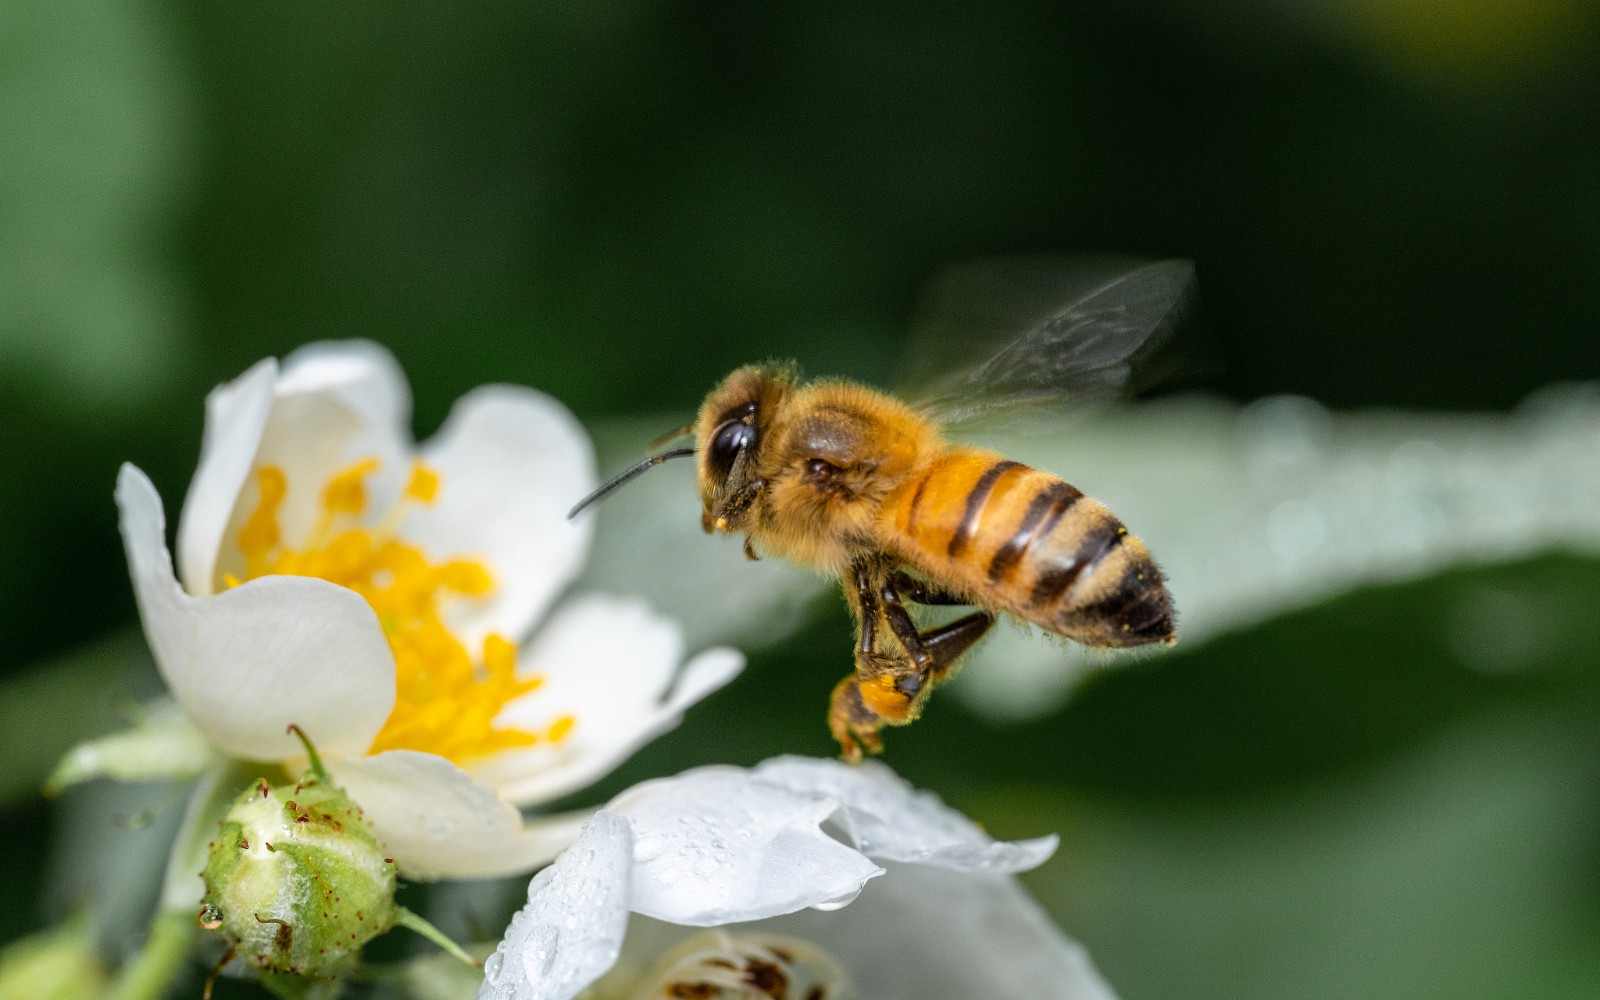 According to the UNEP, 71 of the 100 crop varieties that provide 90 percent of the world's food are pollinated by bees. /CFP 